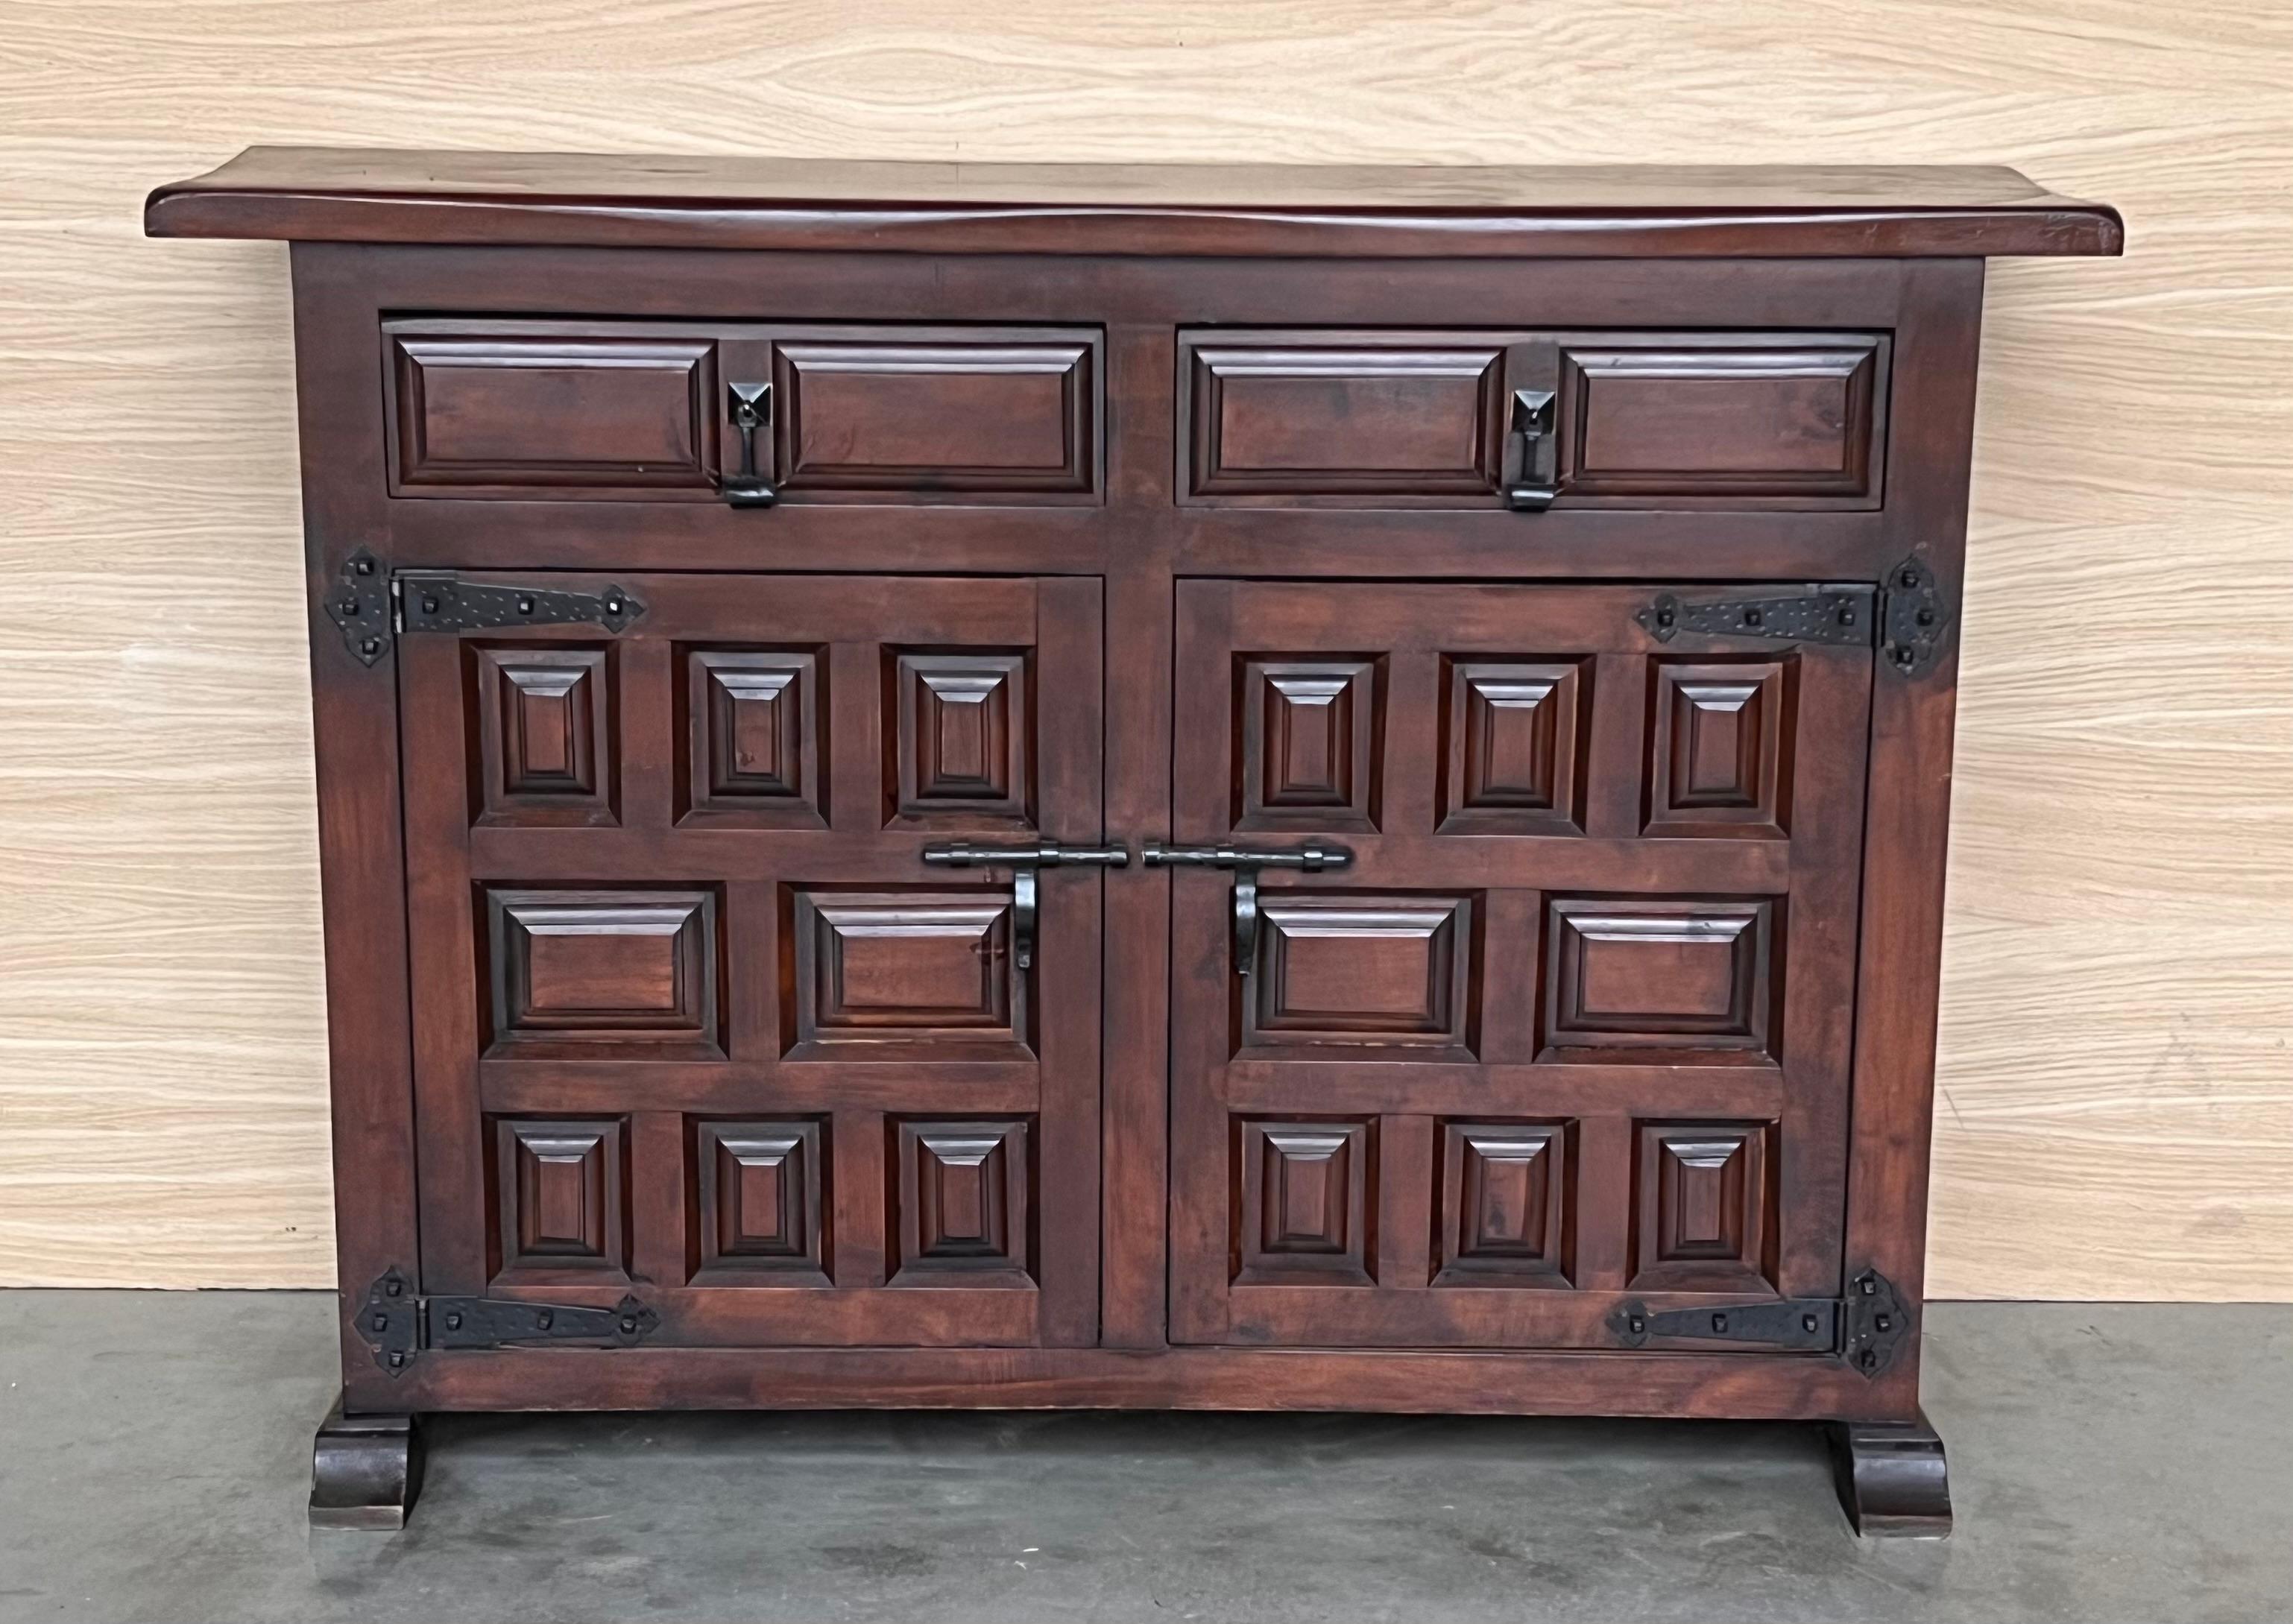 From Northern Spain, constructed of solid walnut, the rectangular top with molded edge atop a conforming case housing two drawers over two doors, the doors paneled with solid walnut, raised on a plinth base.
Beautiful carved drawers and original